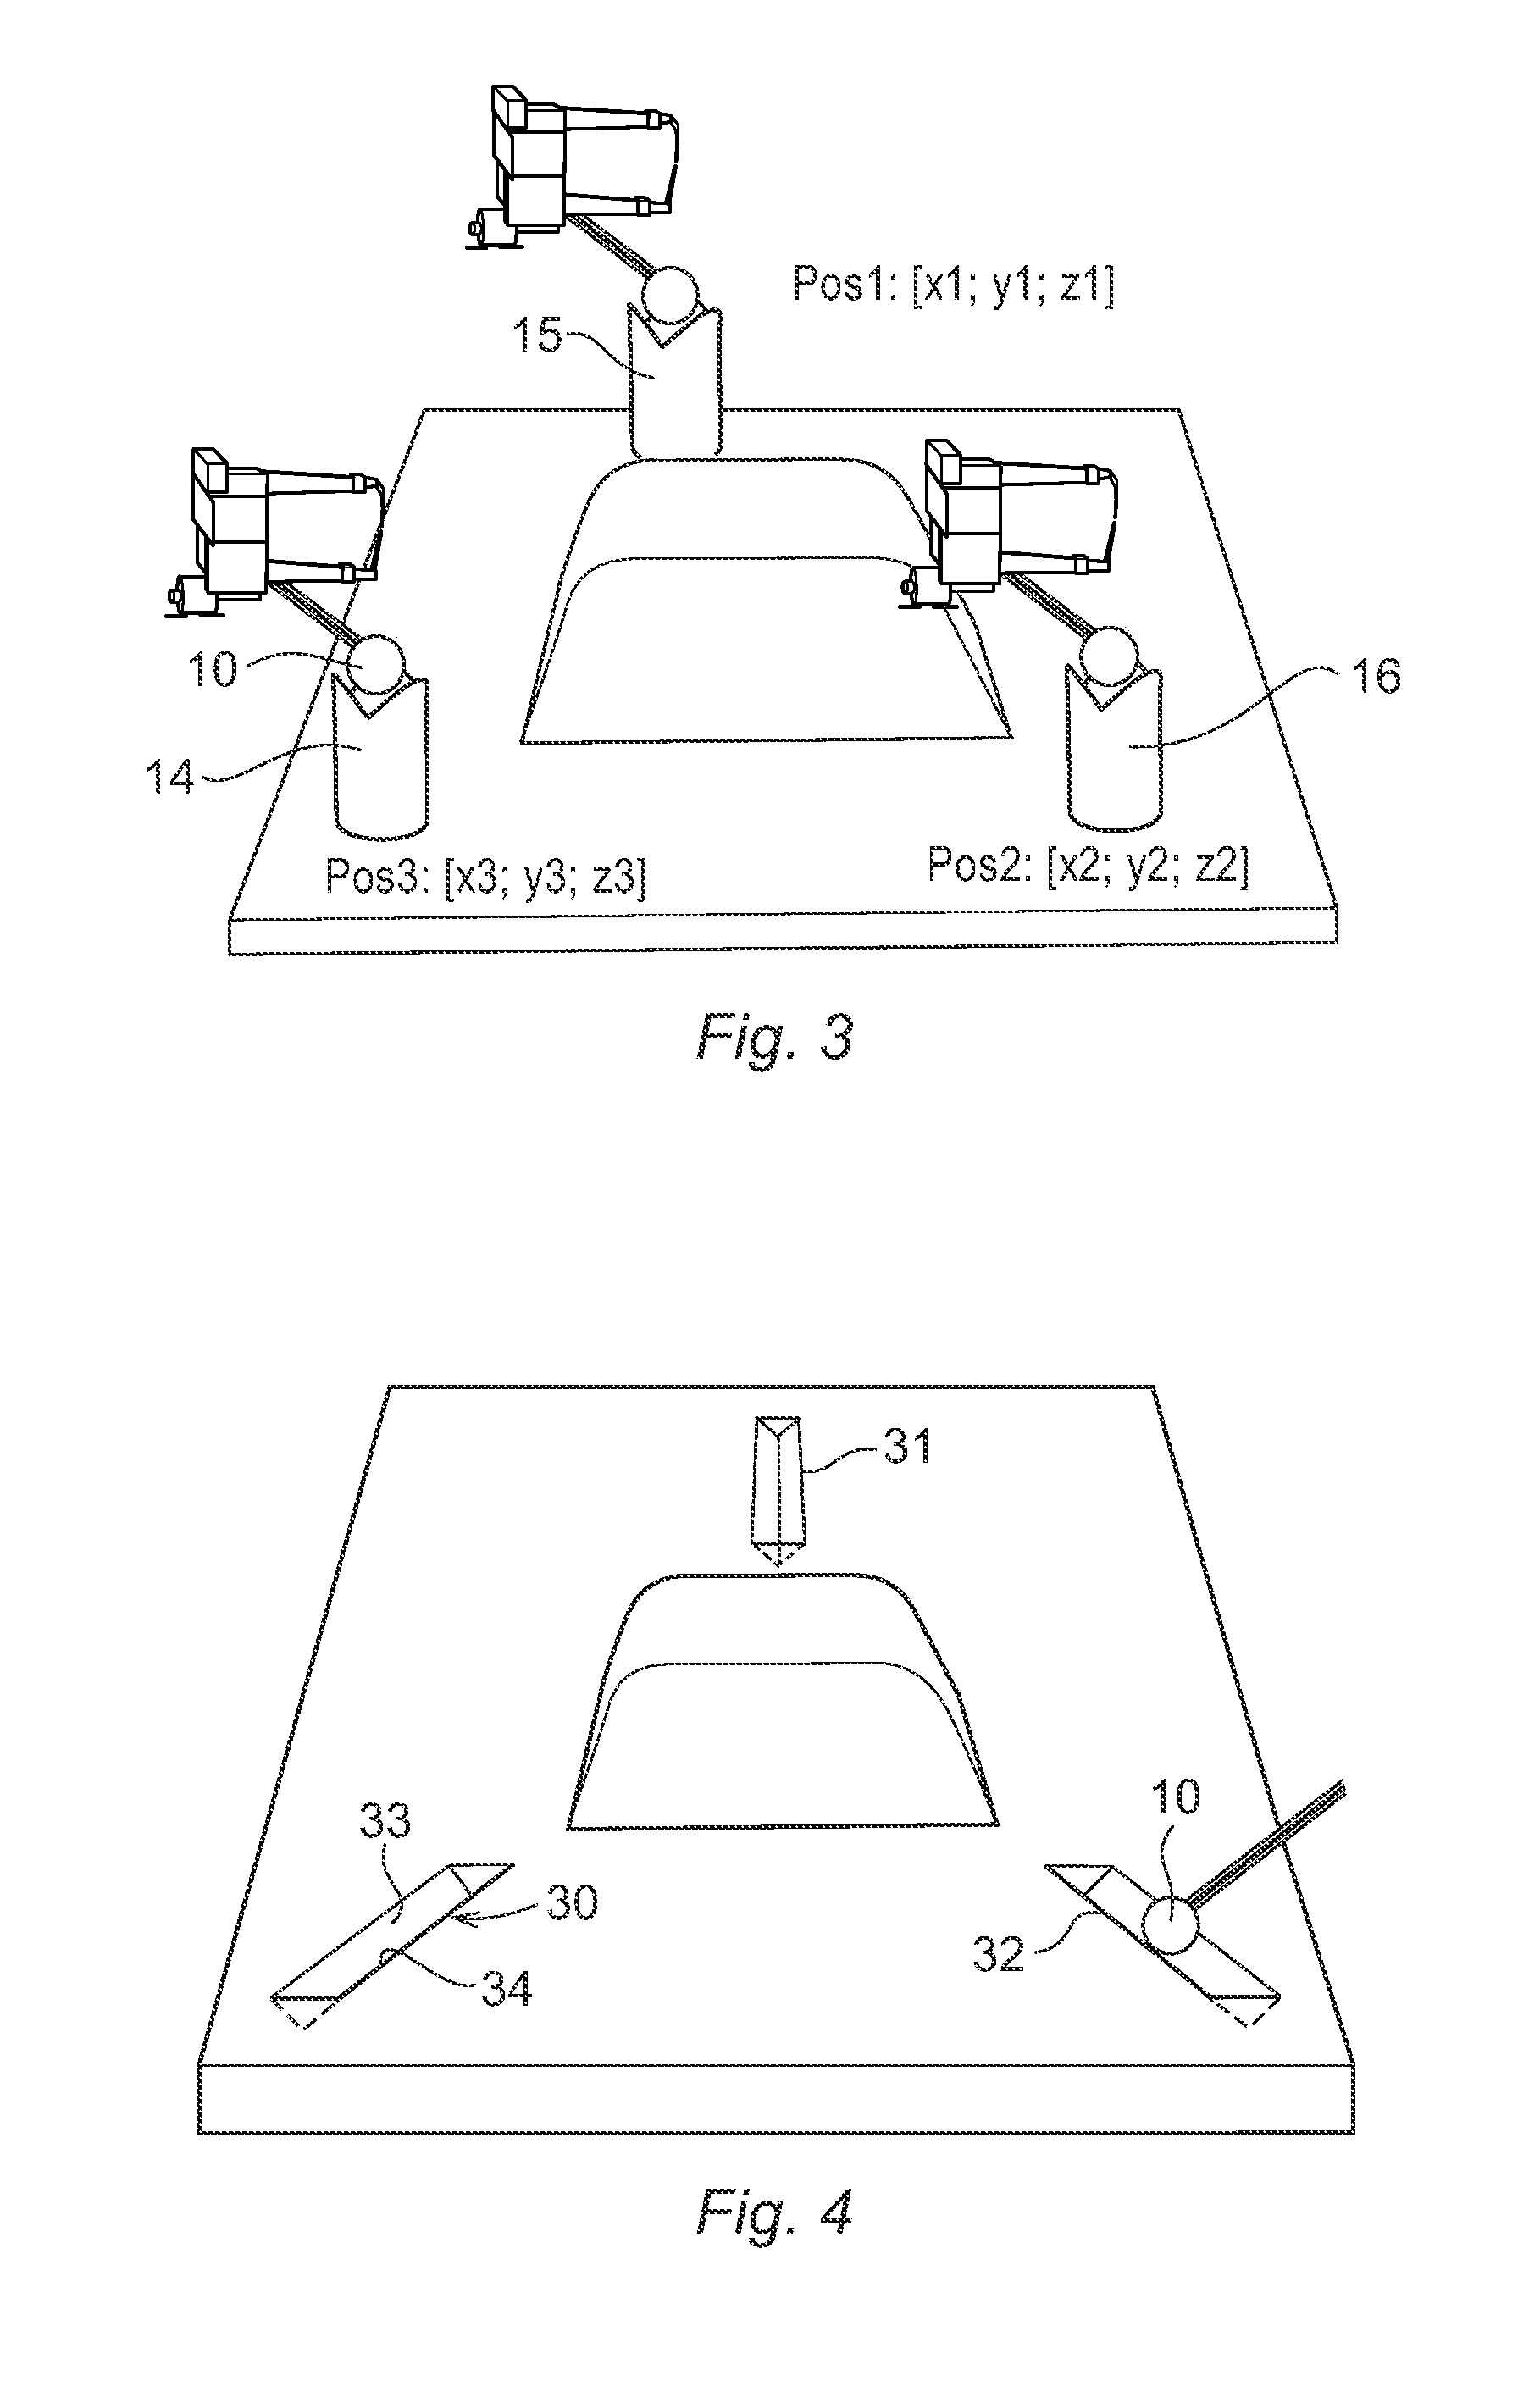 A method and system for determining the relation between a robot coordinate system and a local coordinate system located in the working range of the robot